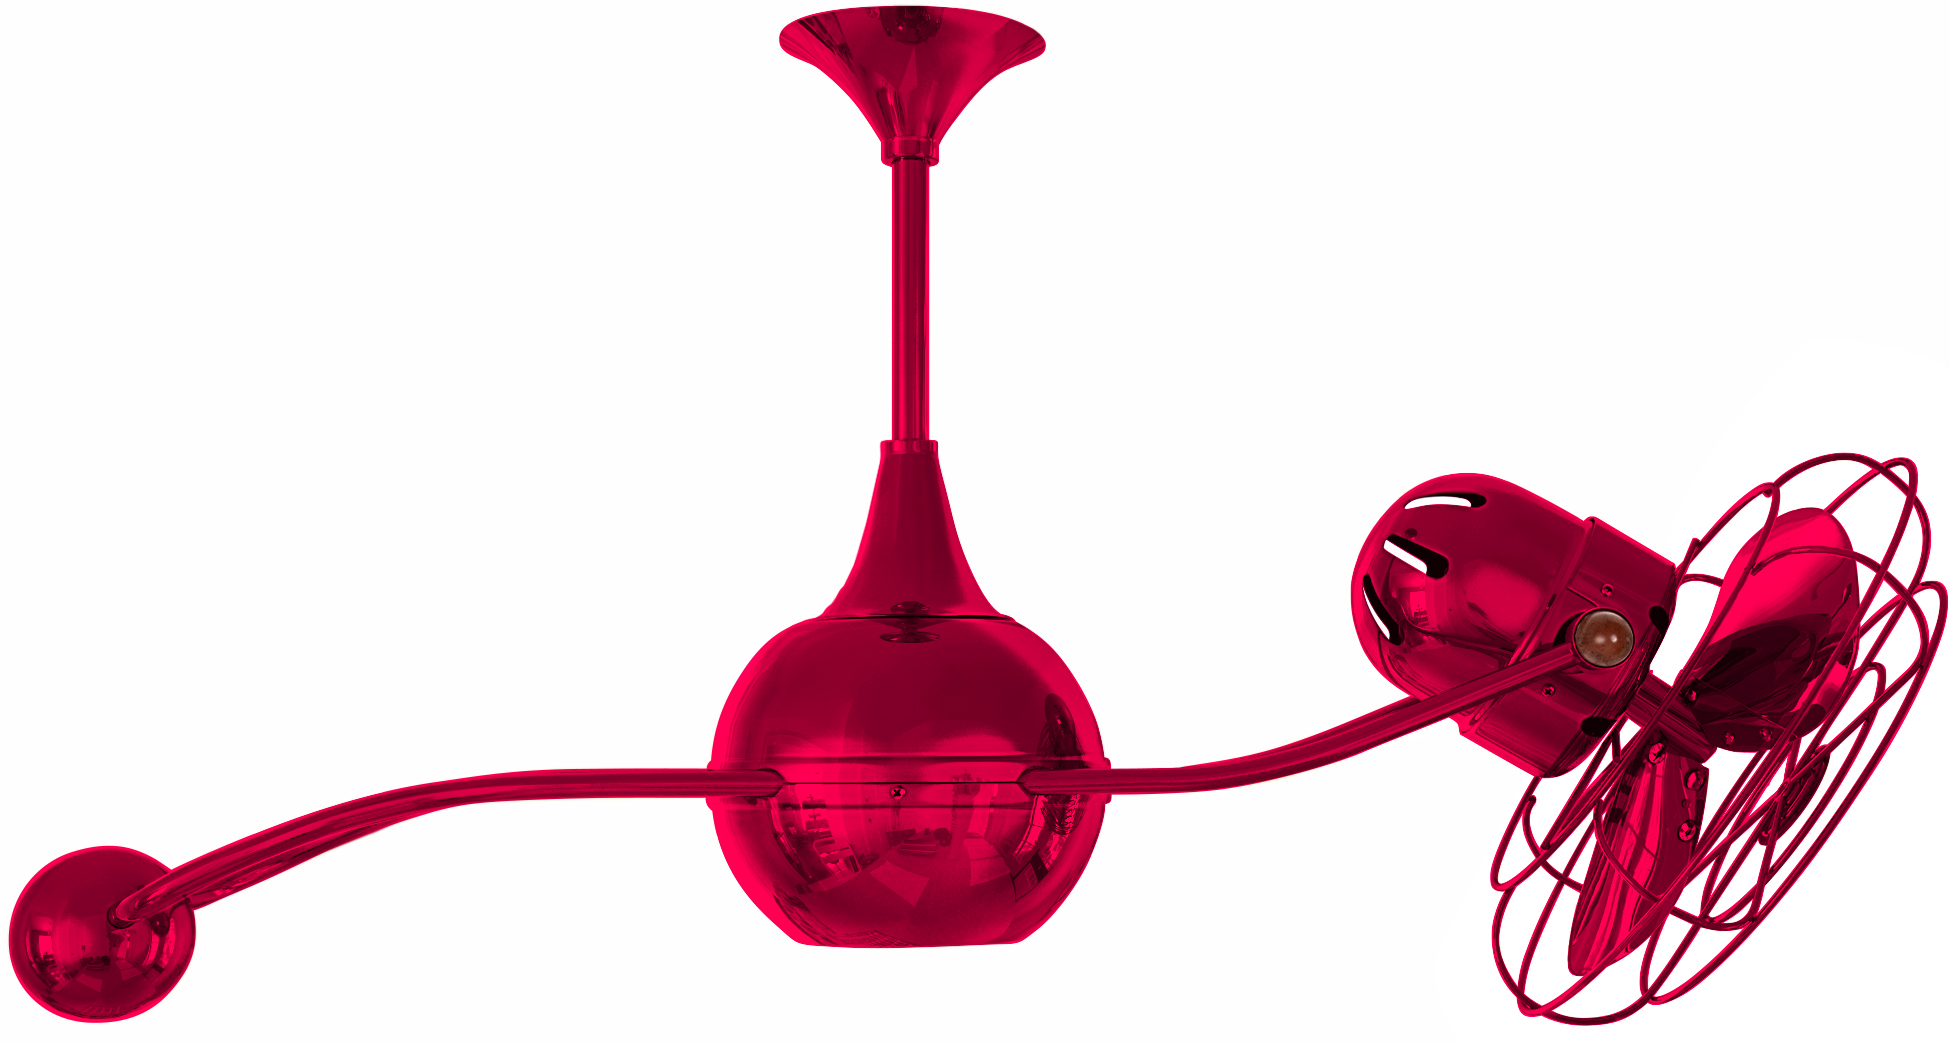 Brisa 2000 ceiling fan in red / rubi finish with metal blades in decorative cage made by Matthews Fan Company.